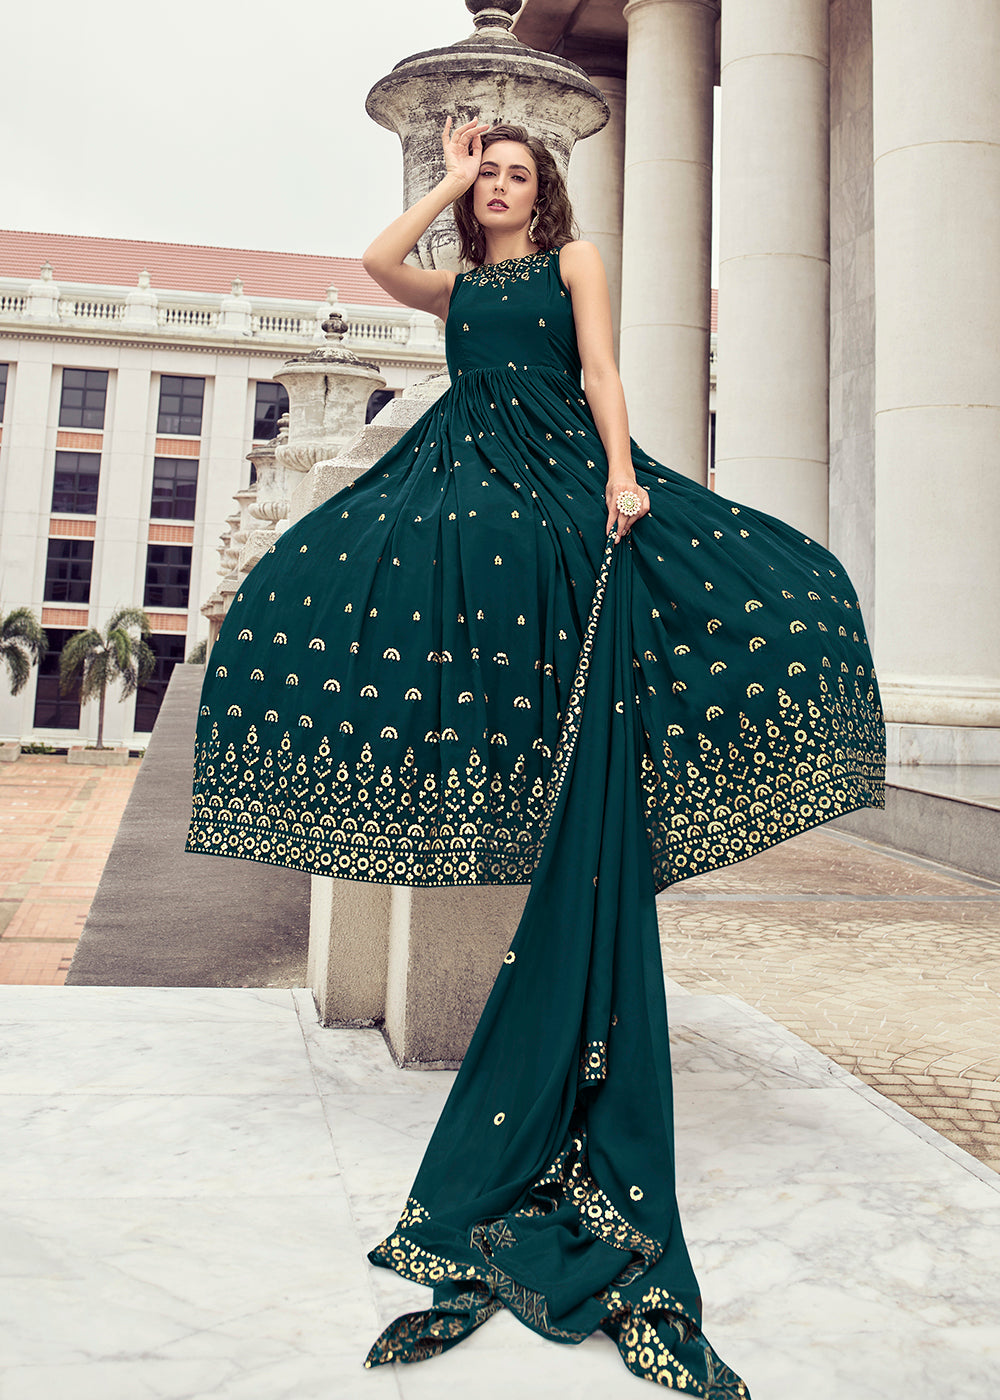 Buy Now Rama Teal Georgette Thread & Sequins Wedding Party Gown Online in USA, UK, Australia, New Zealand, Canada & Worldwide at Empress Clothing. 